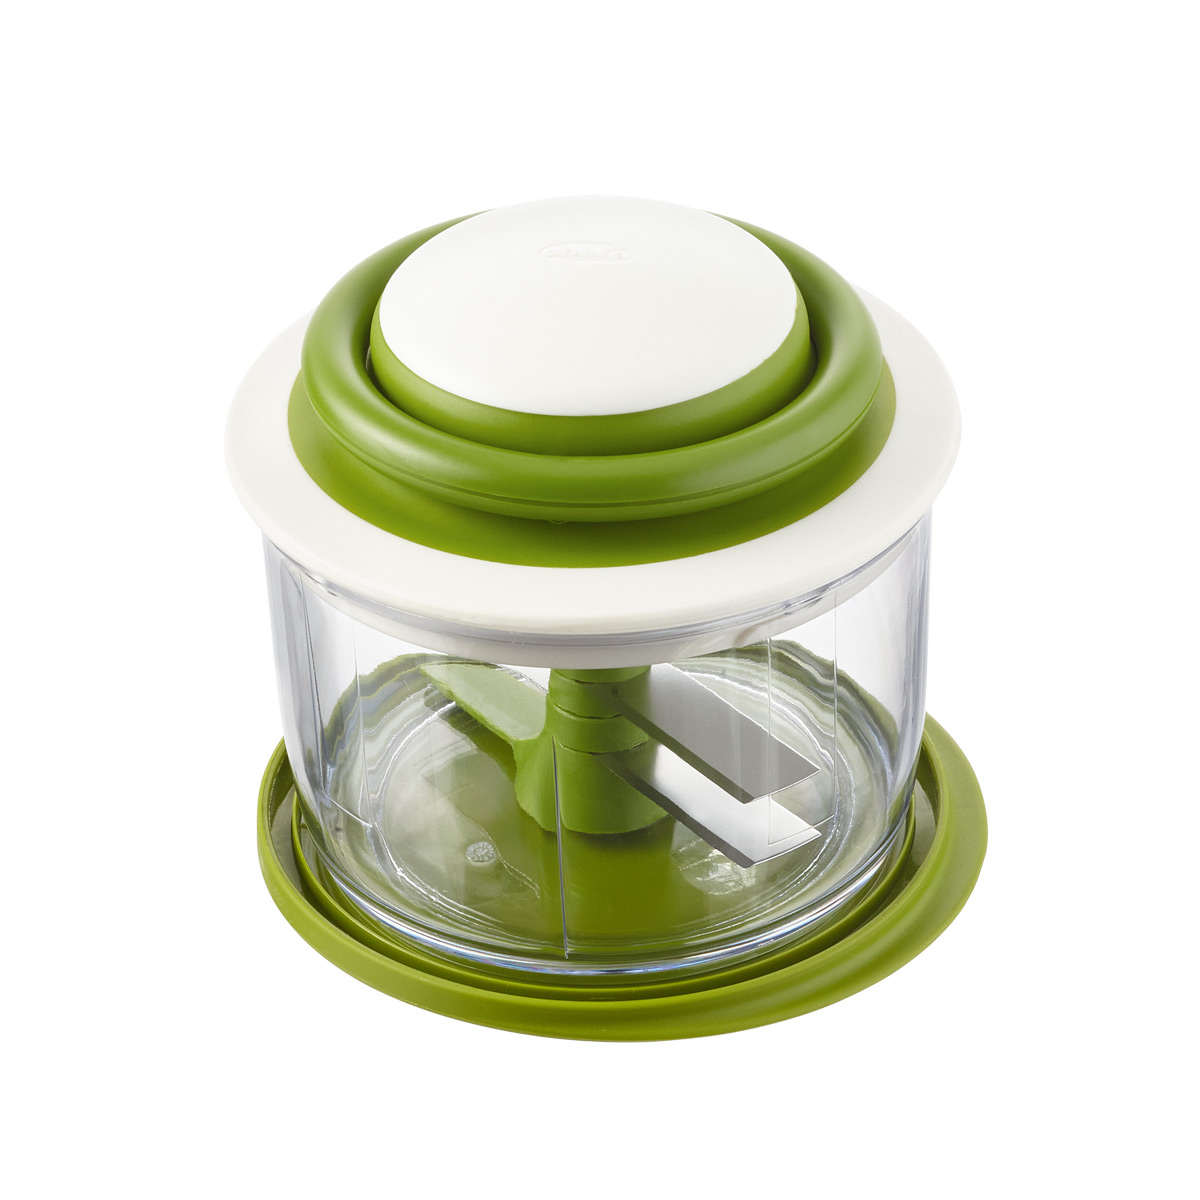 https://www.containerstore.com/catalogimages/425886/10086062_Chefn_Vegetable_Chopper.jpg